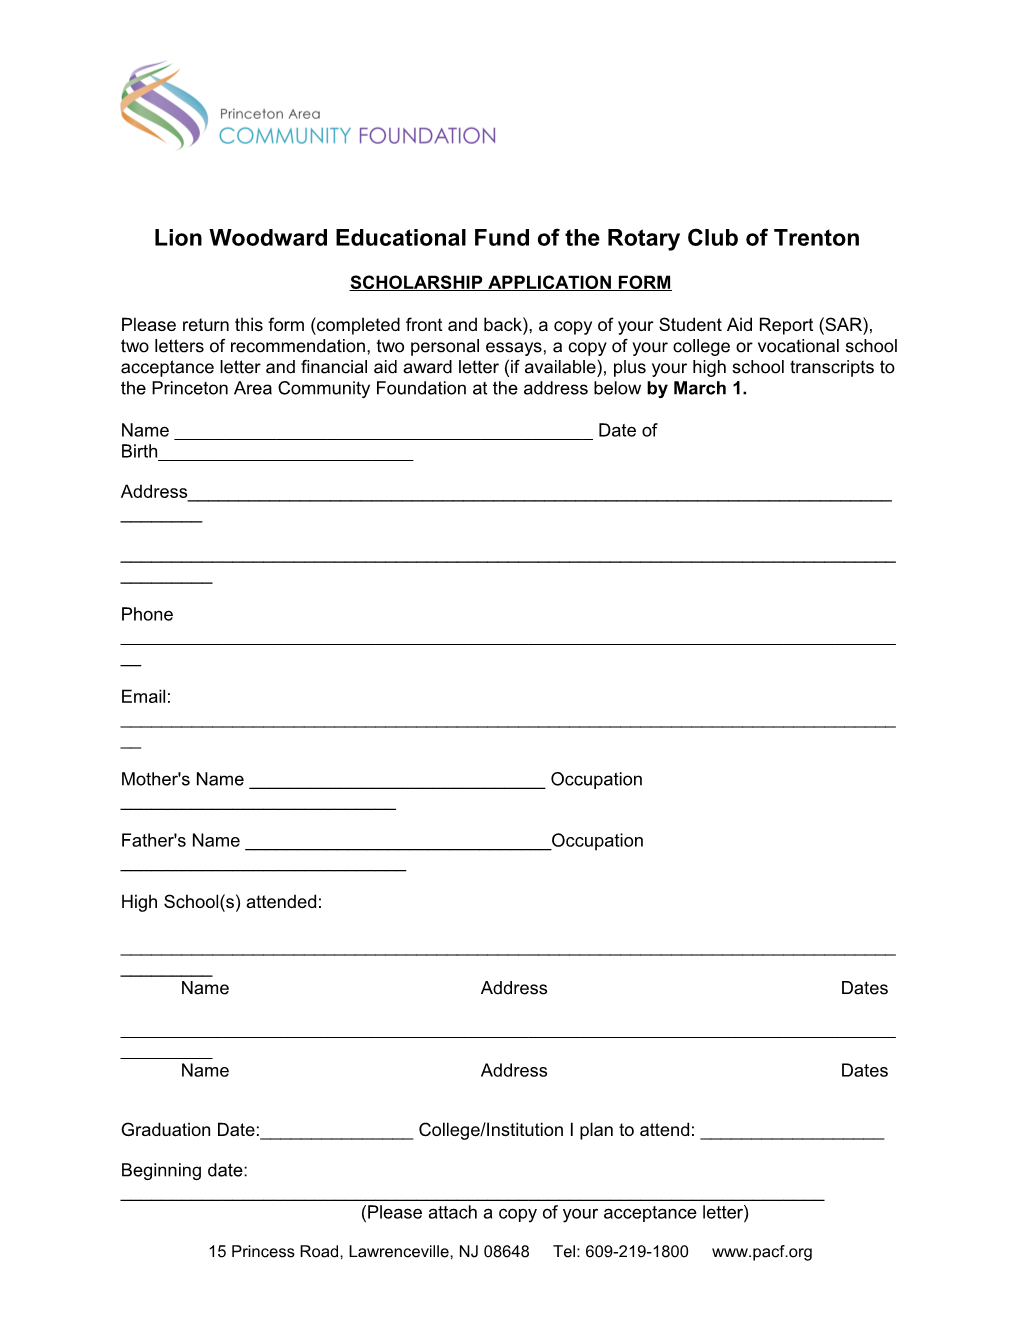 To Transfer Stock As a Donation to the Princeton Area Community Foundation, Please Write